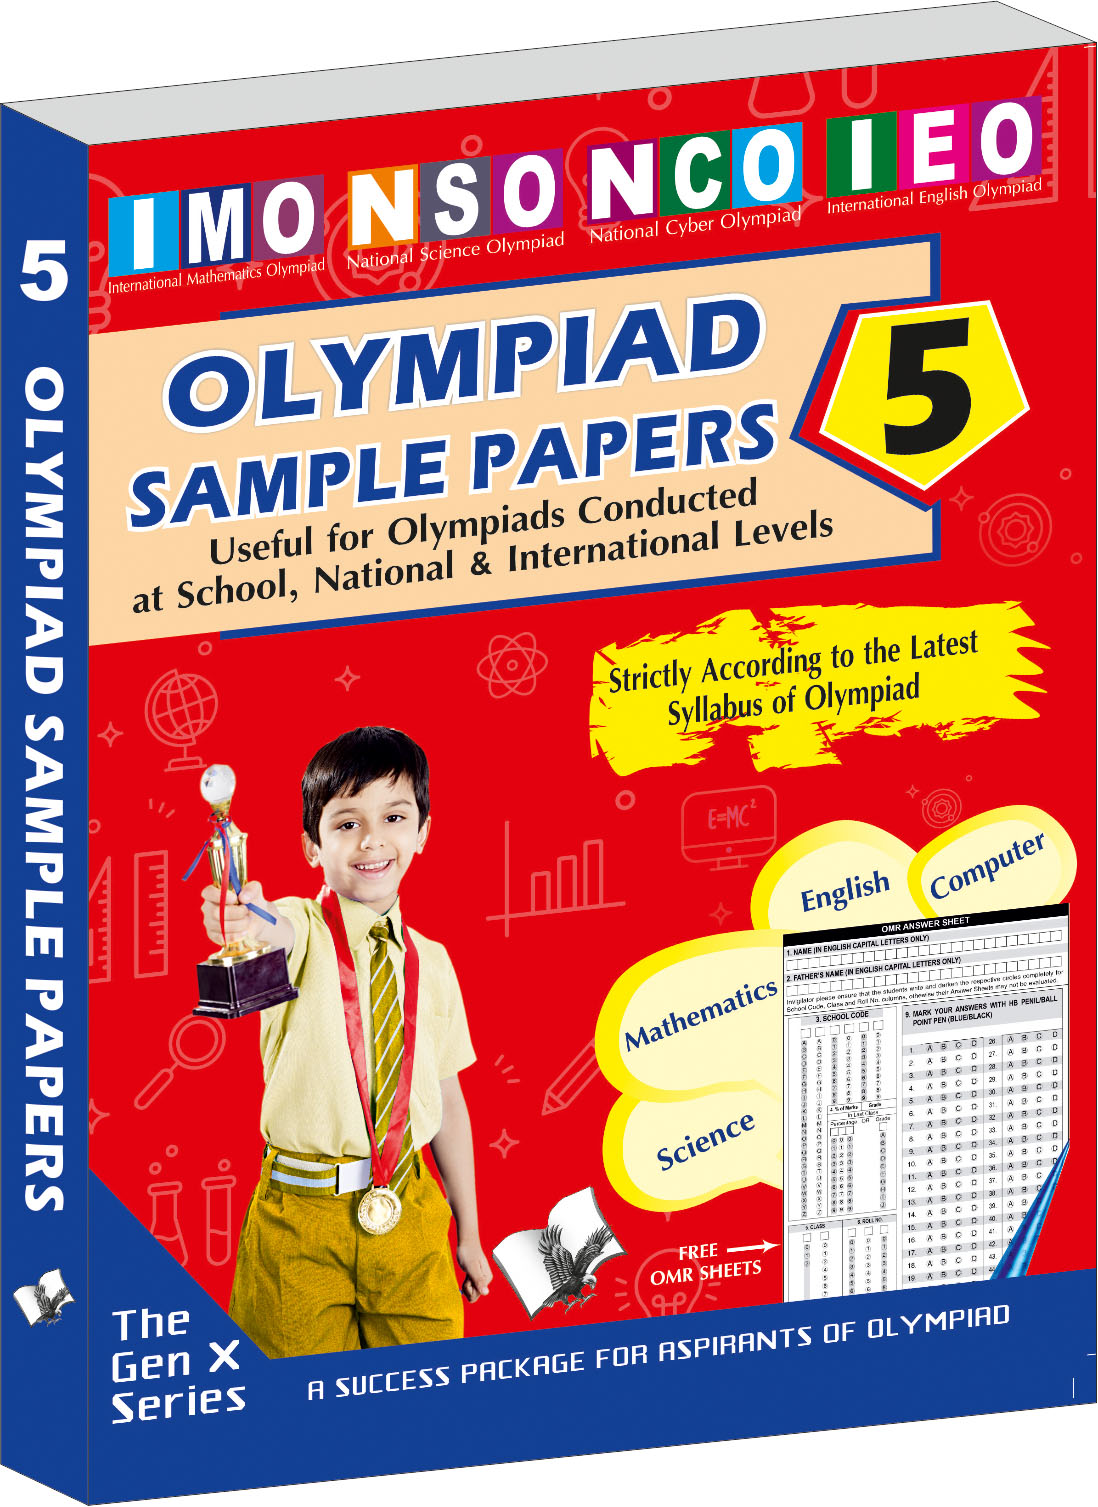 olympiad-sample-paper-5-useful-for-olympiad-conducted-at-school-national-international-levels